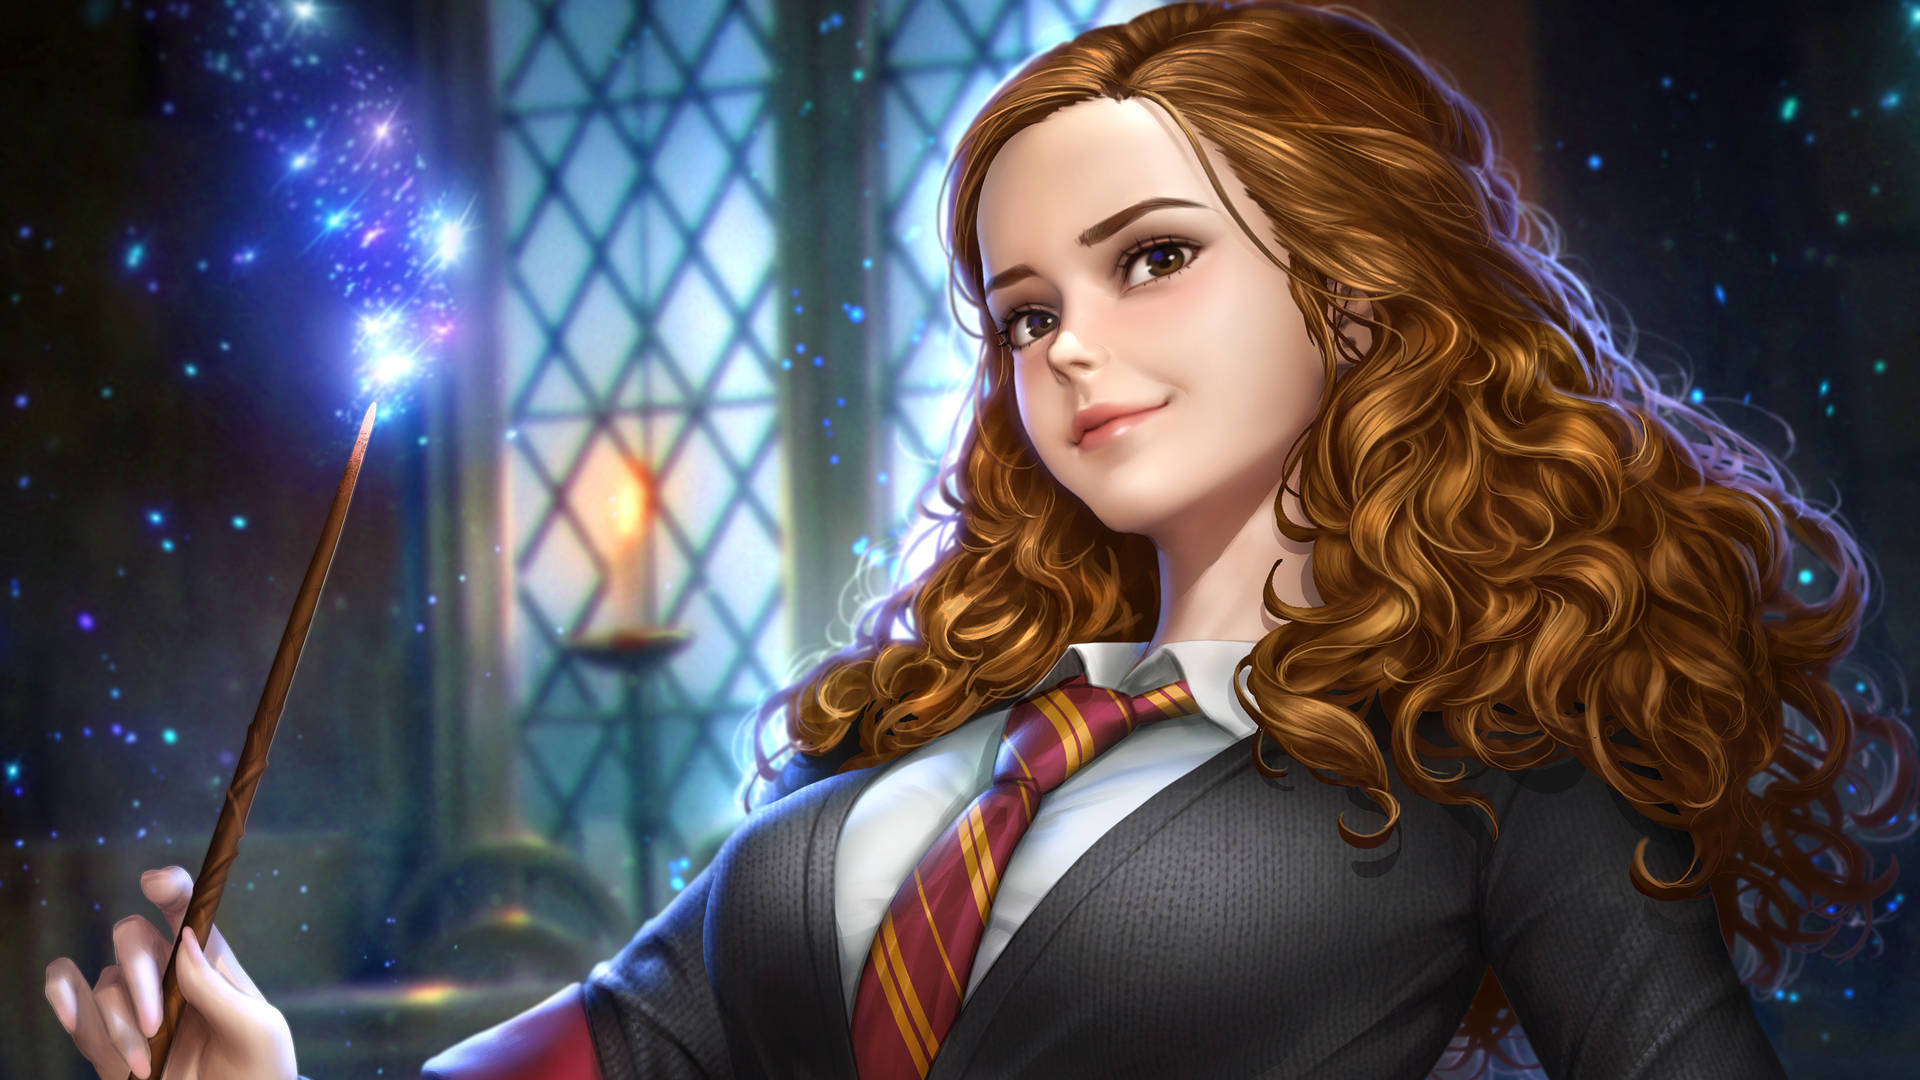 Download Animated Hermione Harry Potter Wallpaper 